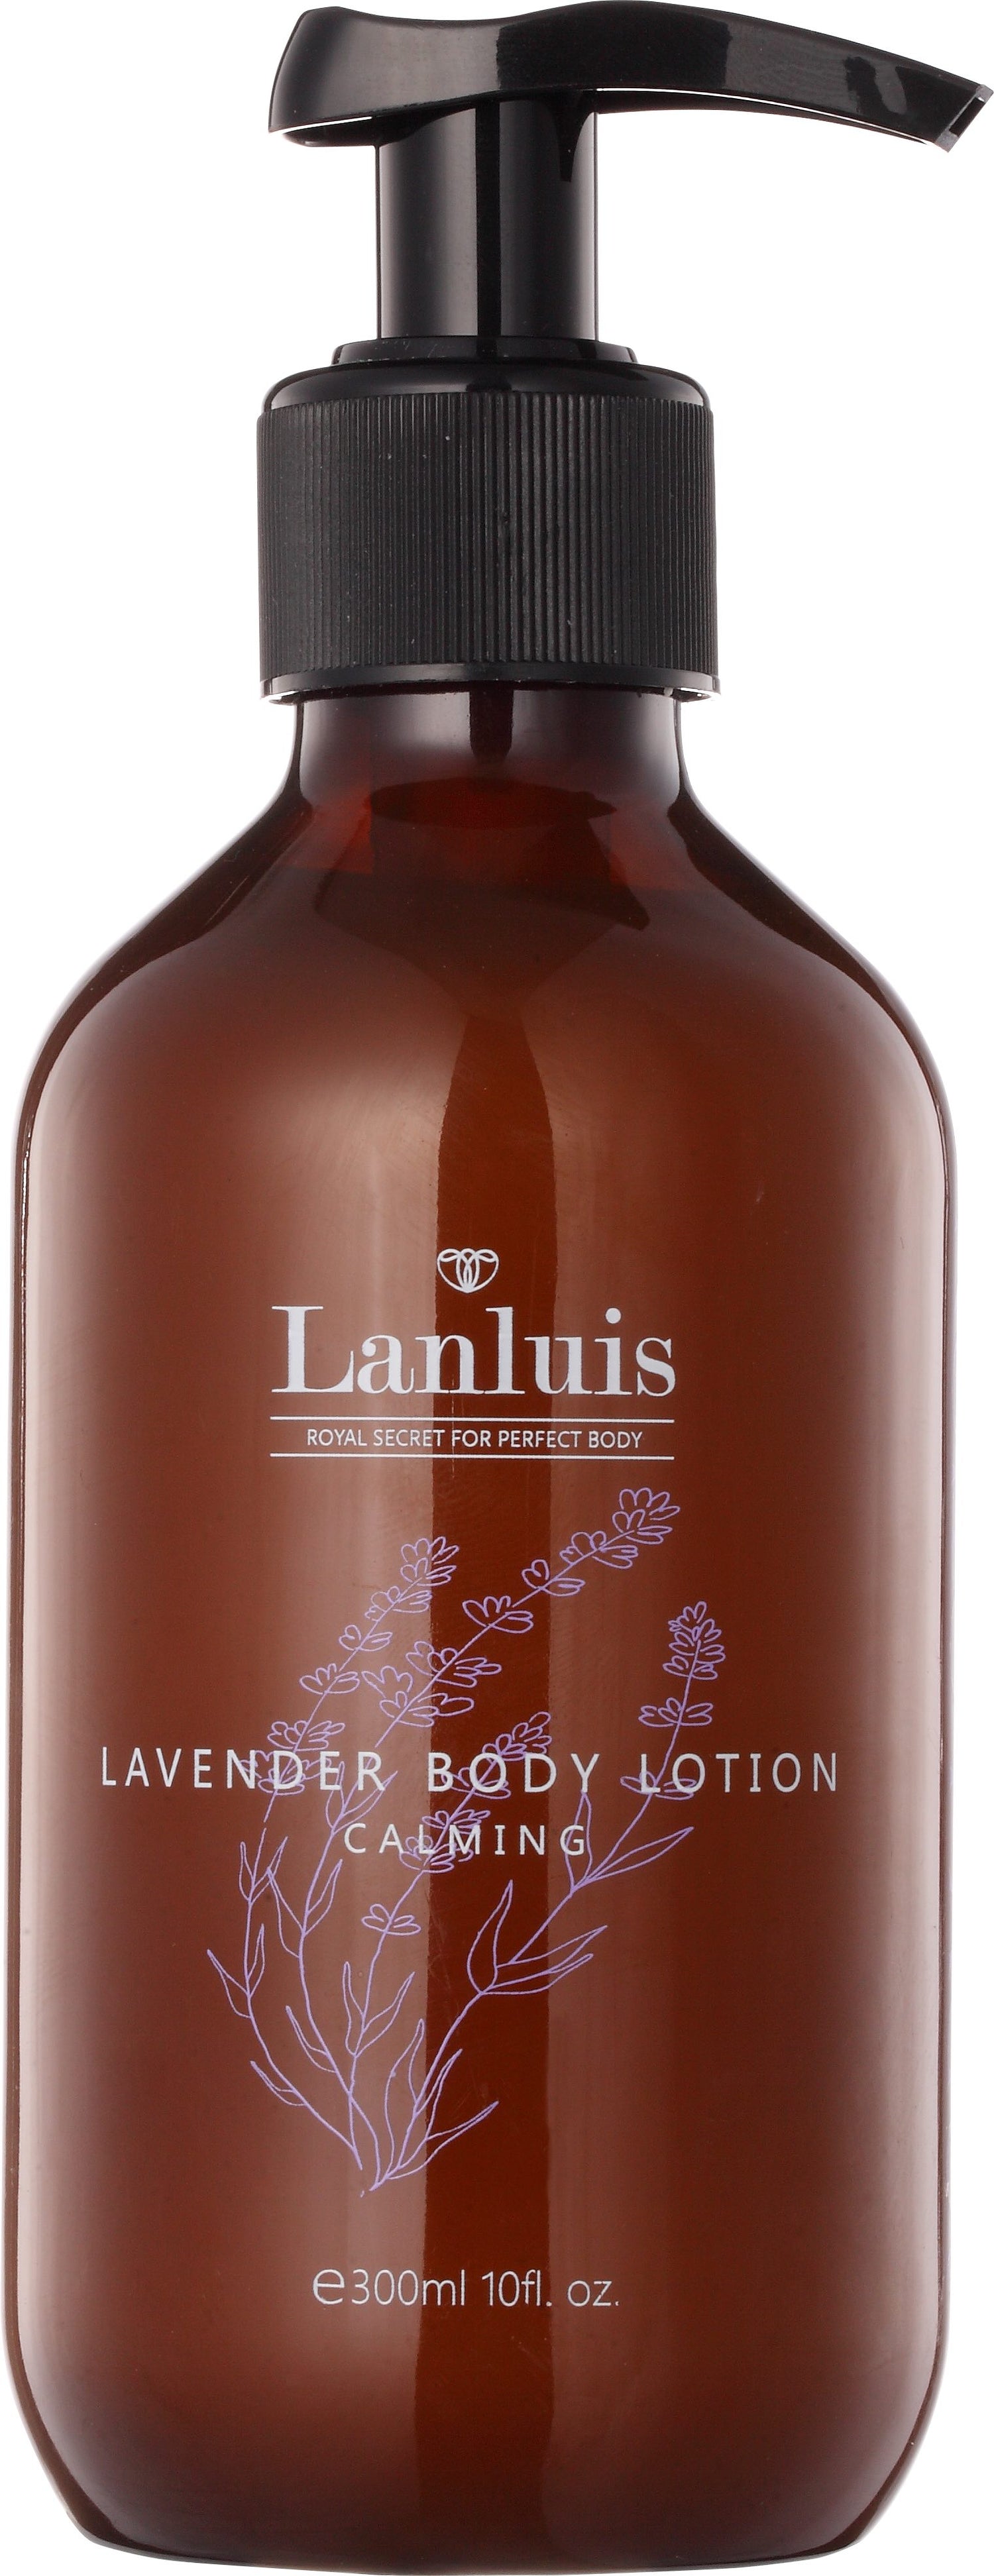 Lavender Body Lotion - Calming